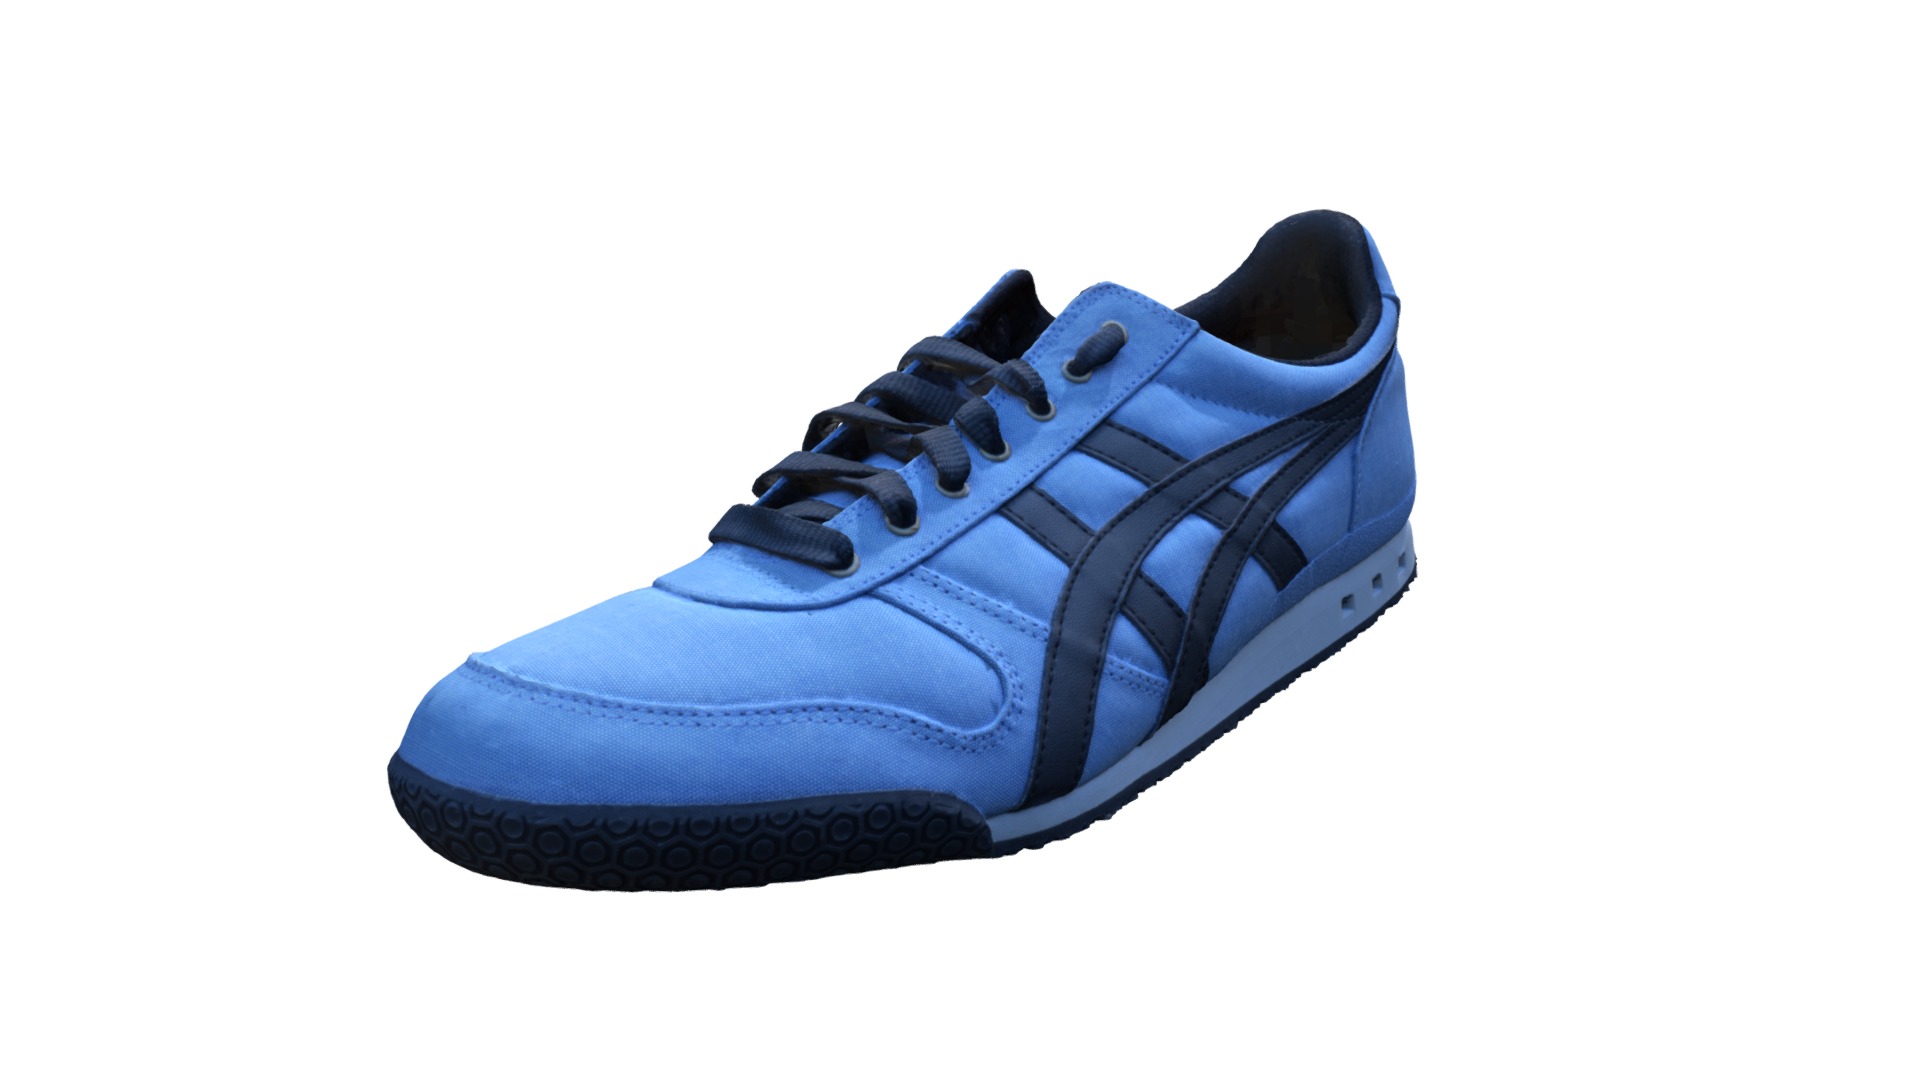 3D model Onitsuka Tiger, Ultimate 81. - This is a 3D model of the Onitsuka Tiger, Ultimate 81.. The 3D model is about a blue and black shoe.